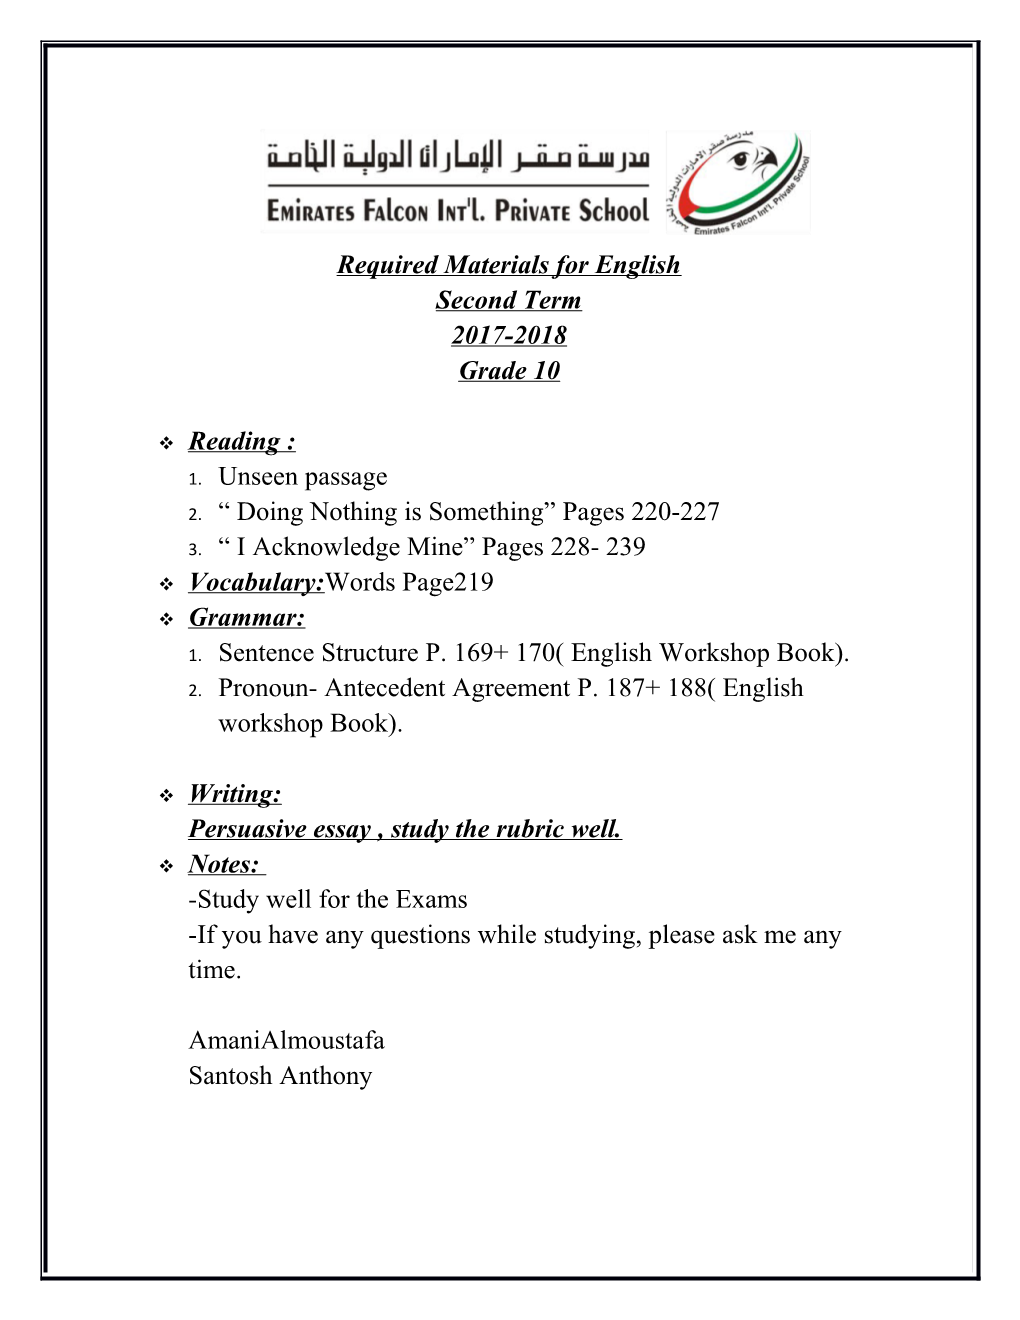 Required Materials for English